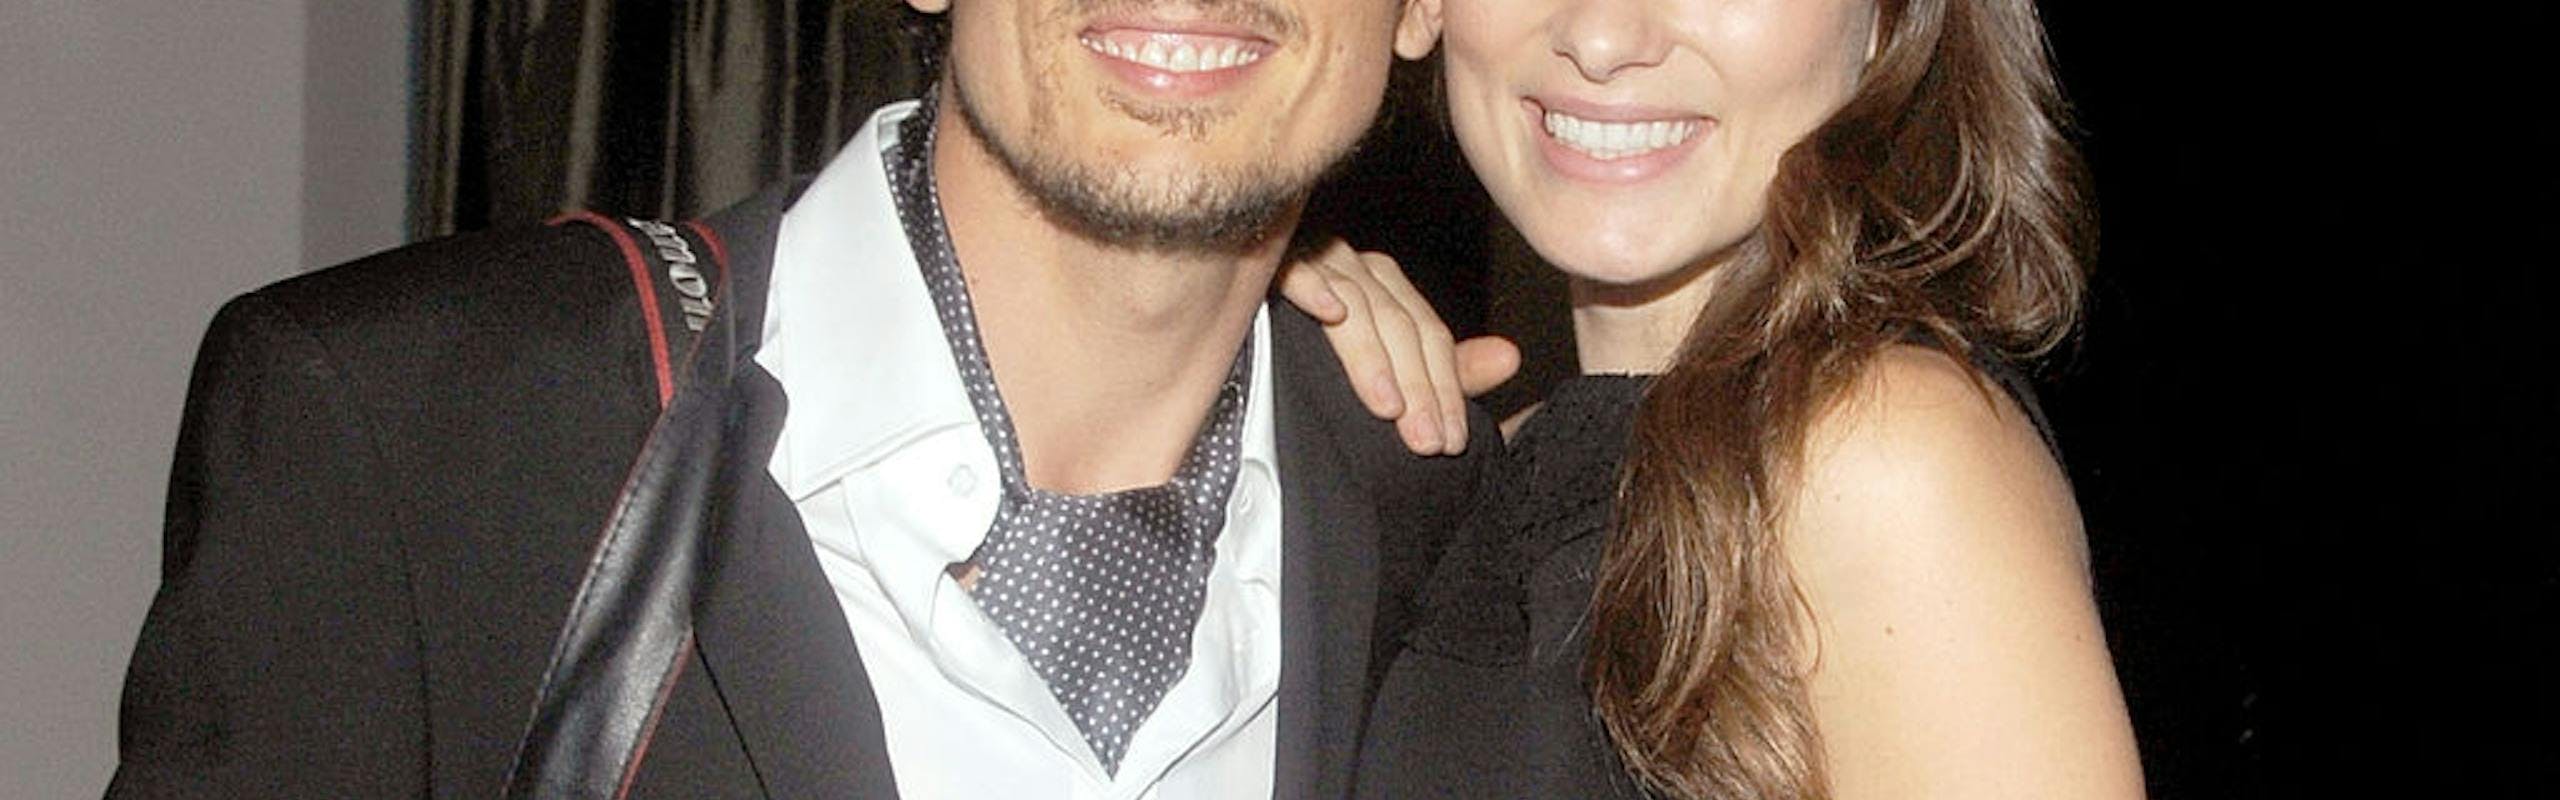 A man in a black and white suit next to a woman in a black dress.